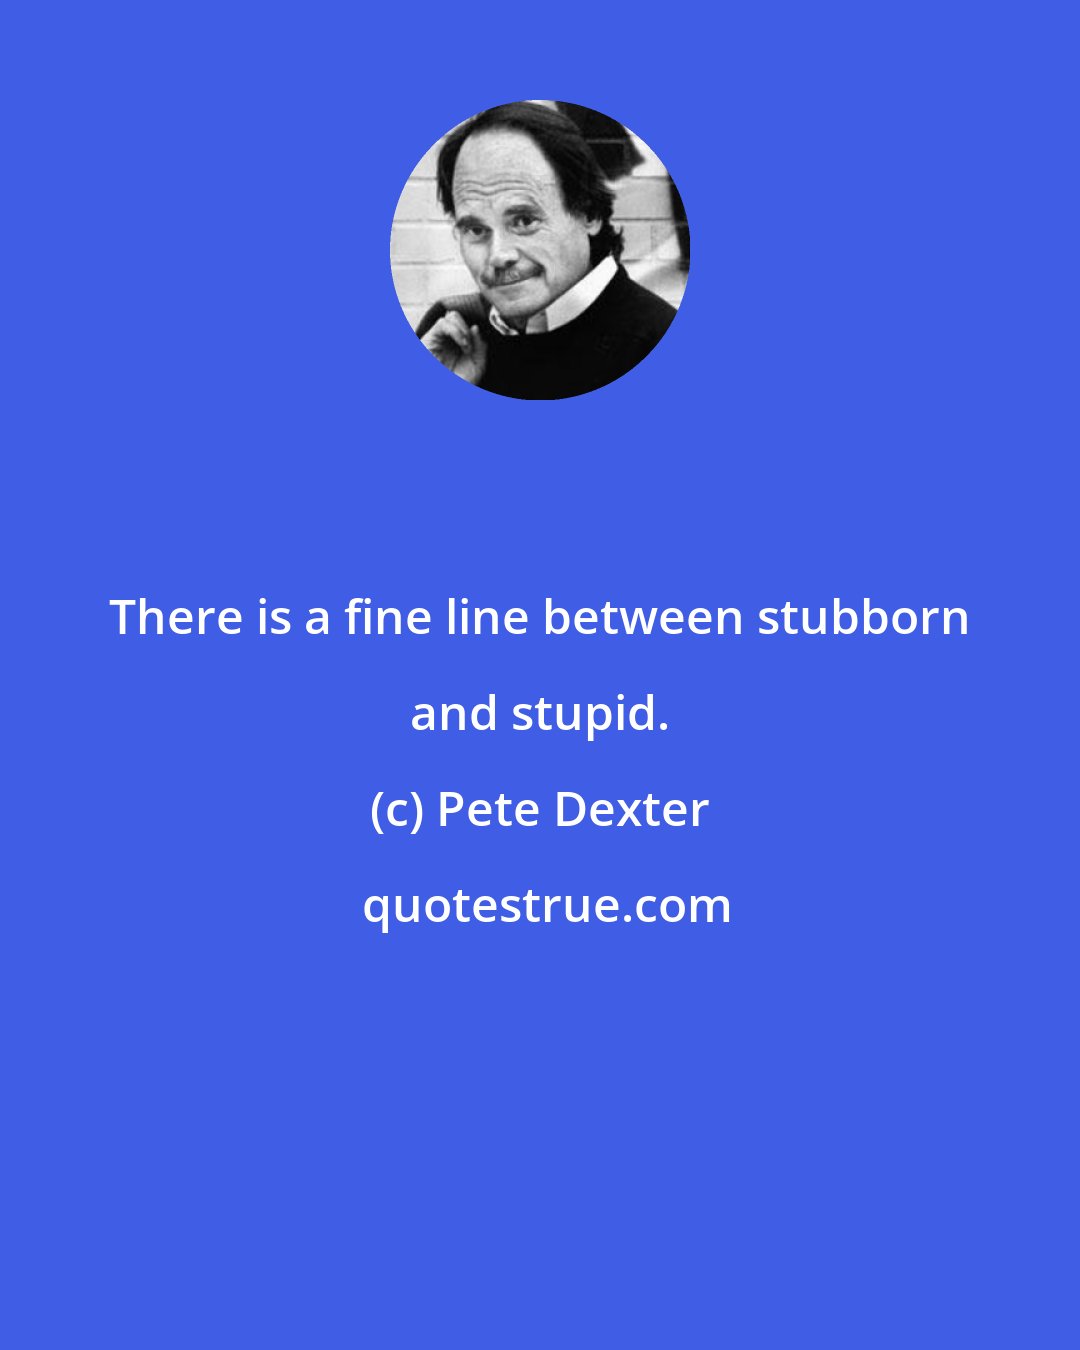 Pete Dexter: There is a fine line between stubborn and stupid.